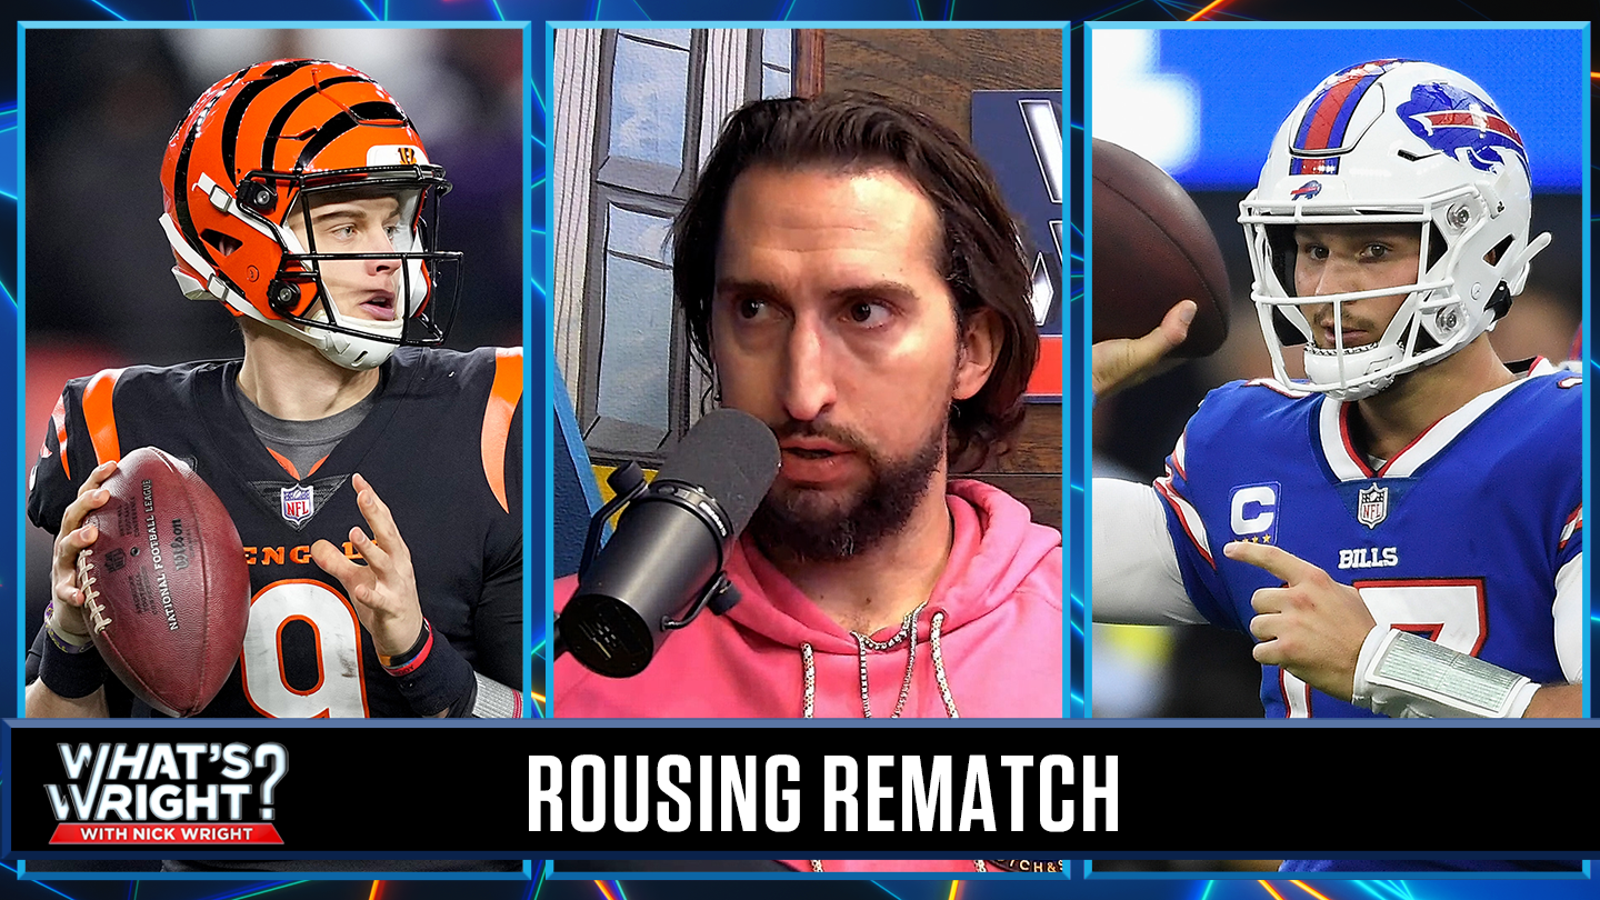 Nick talks Bengals-Bills in 'Game of the Year' rematch